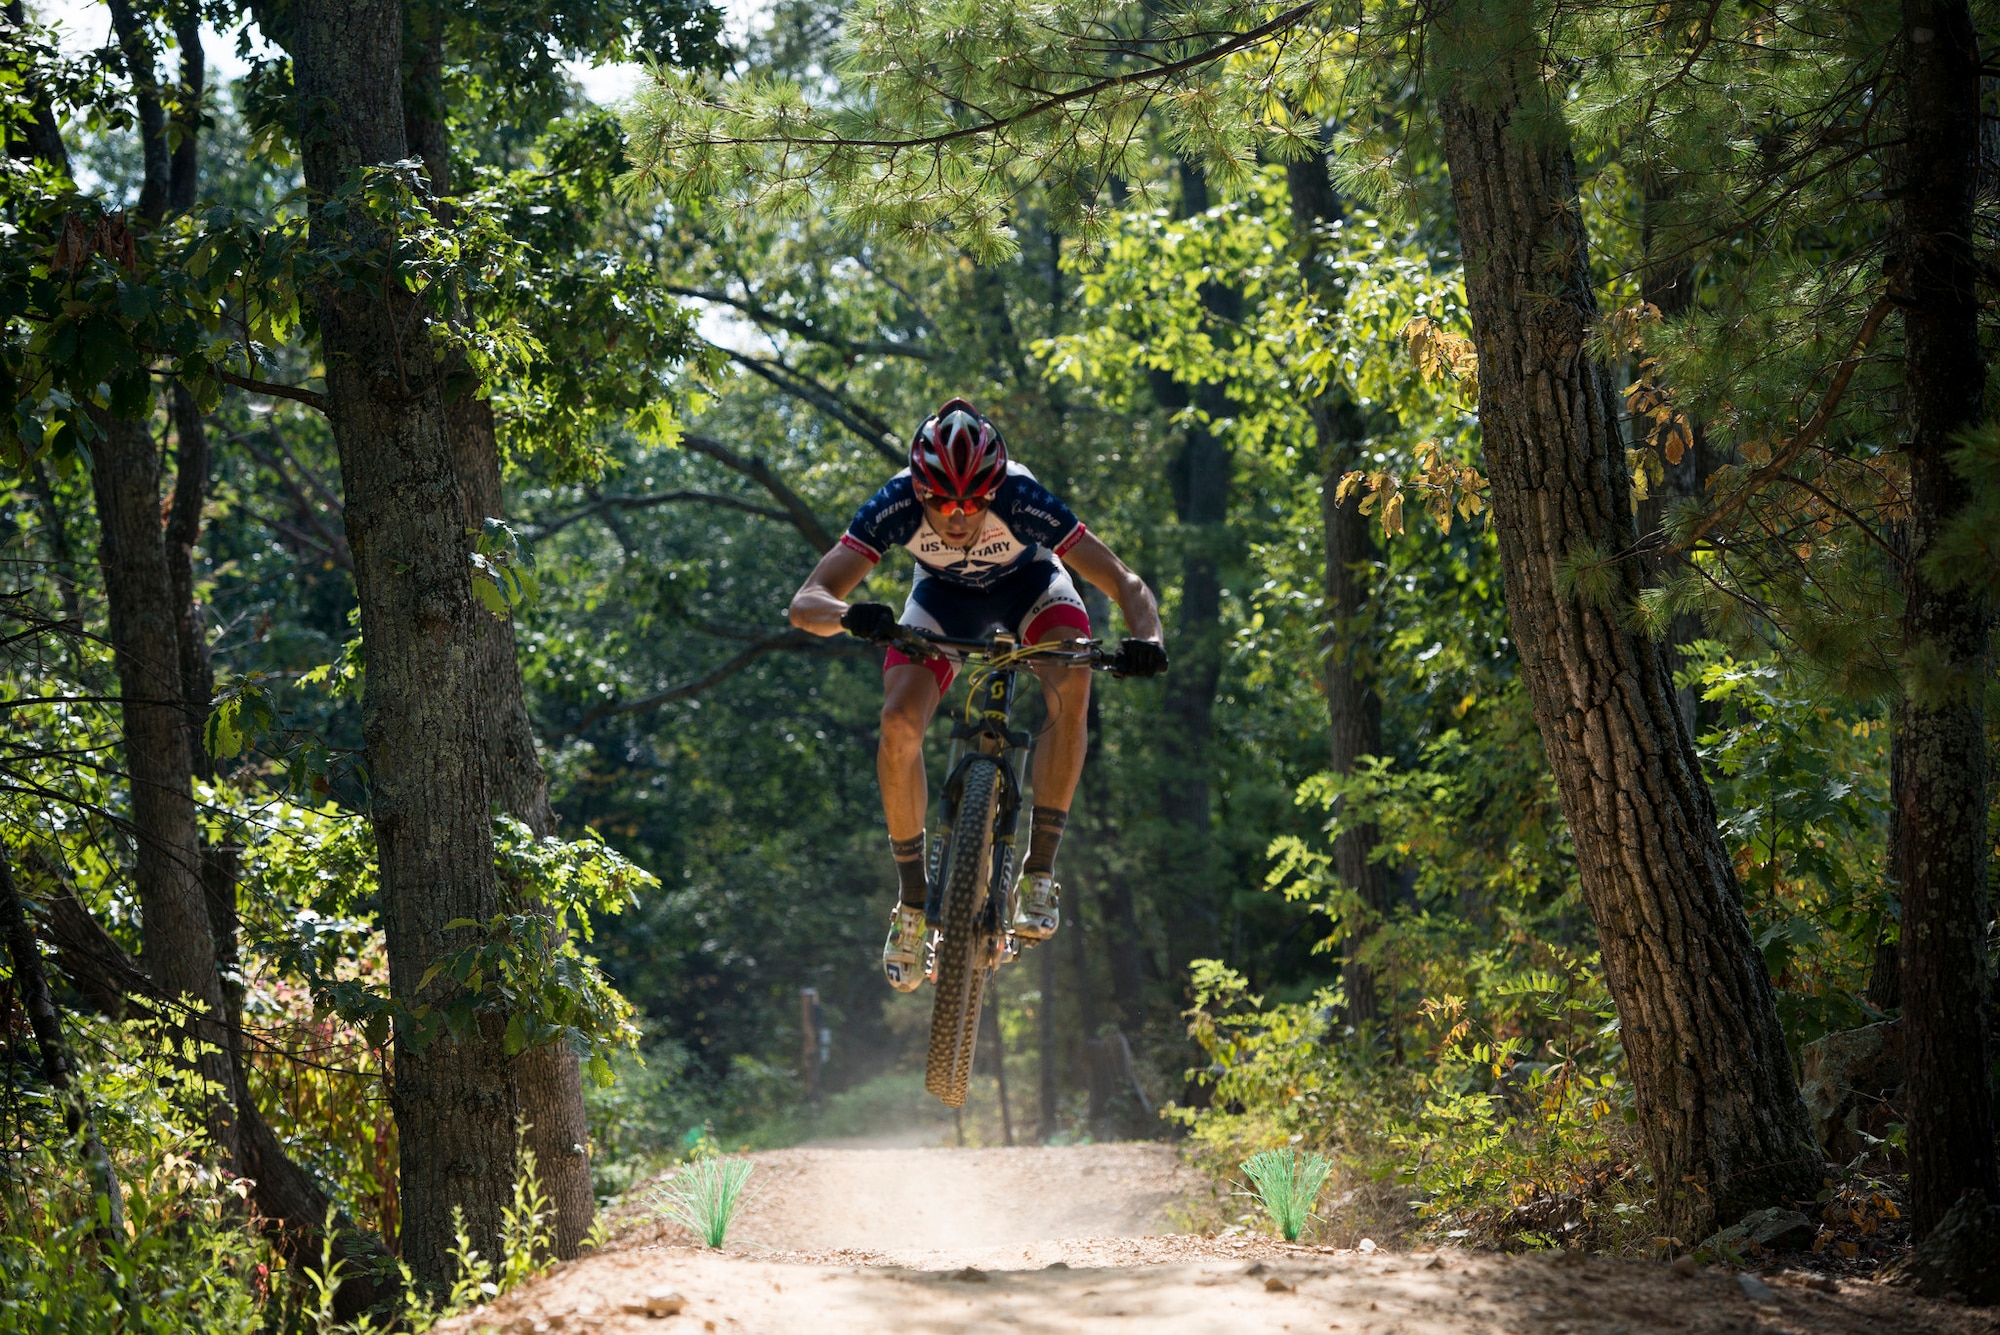 Senior Airman David Flaten is a bicyclist in the Air Force World Class Athlete Program. He competes in both mountain and road biking categories.